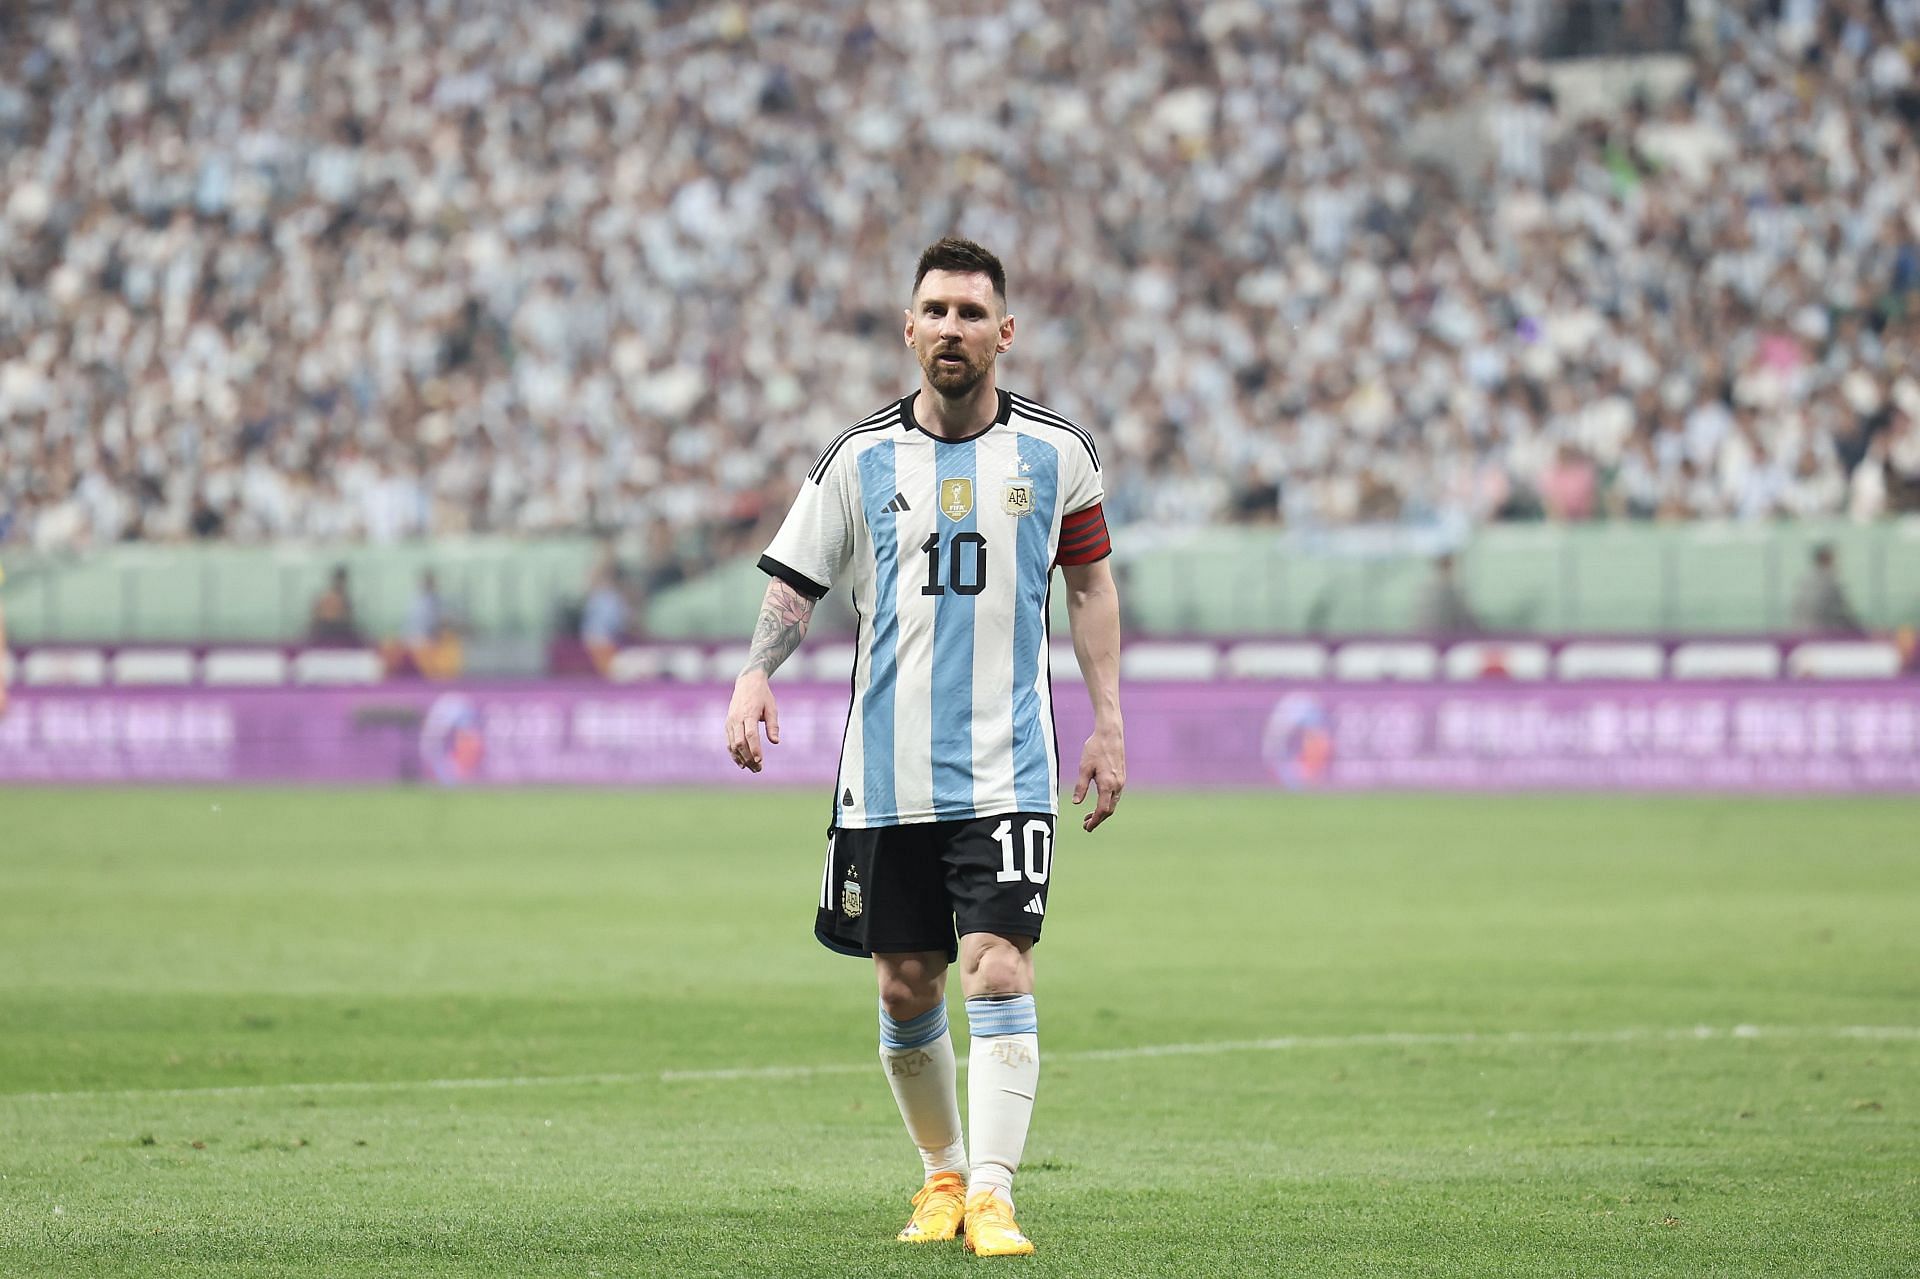 The Argentine superstar claims that trophies are greater than personal accolades.